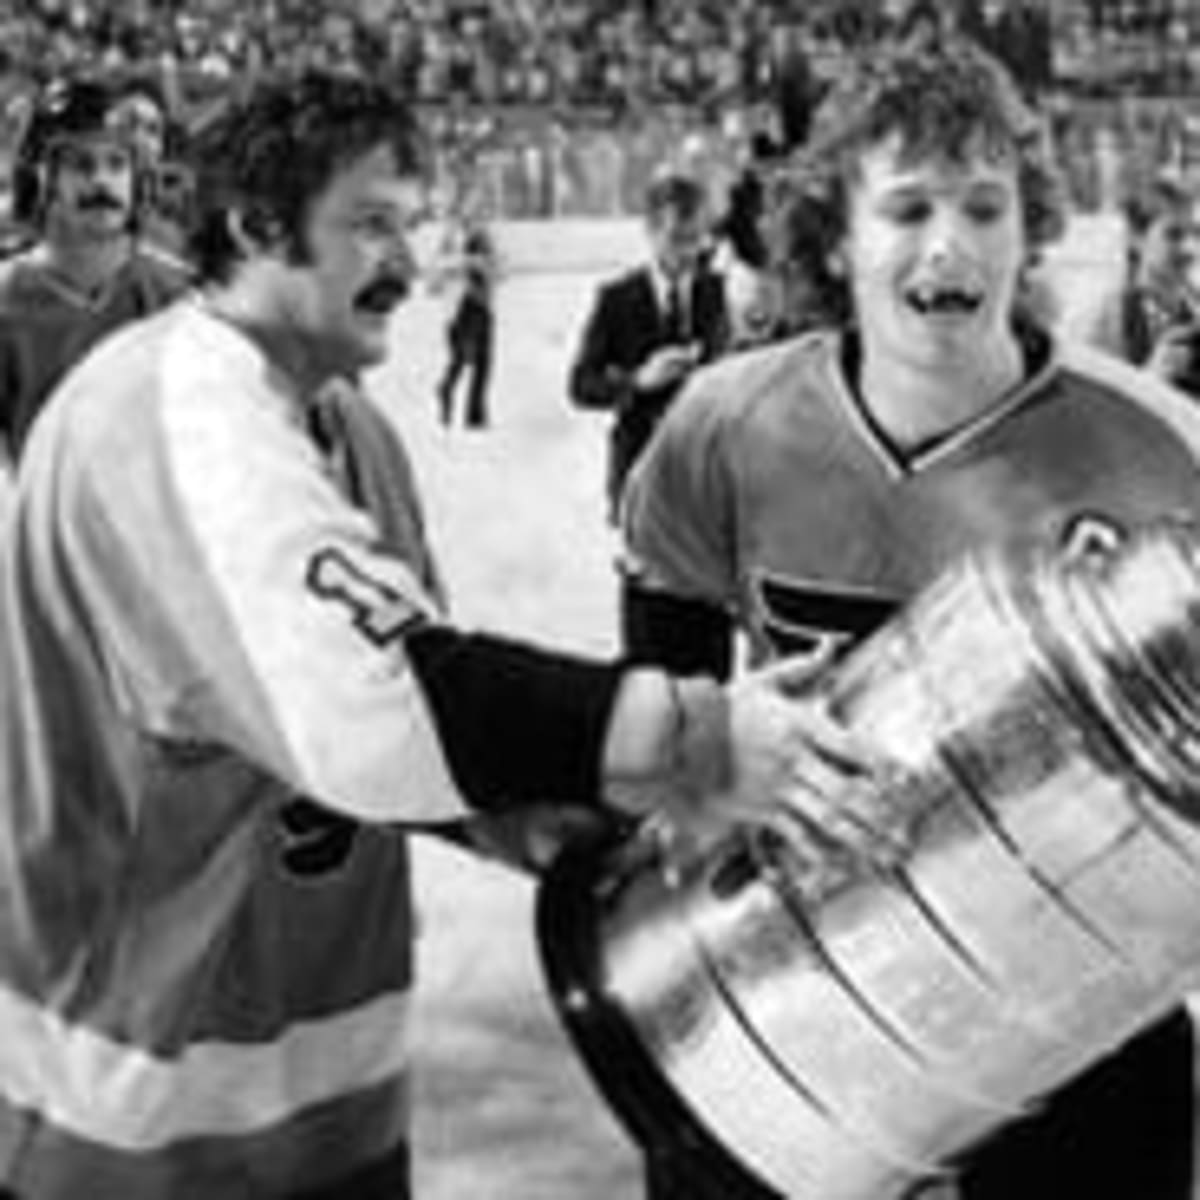 From Mad Dog to The Fog, Philadelphia Flyers had it all when they won '75  Cup - The Hockey News